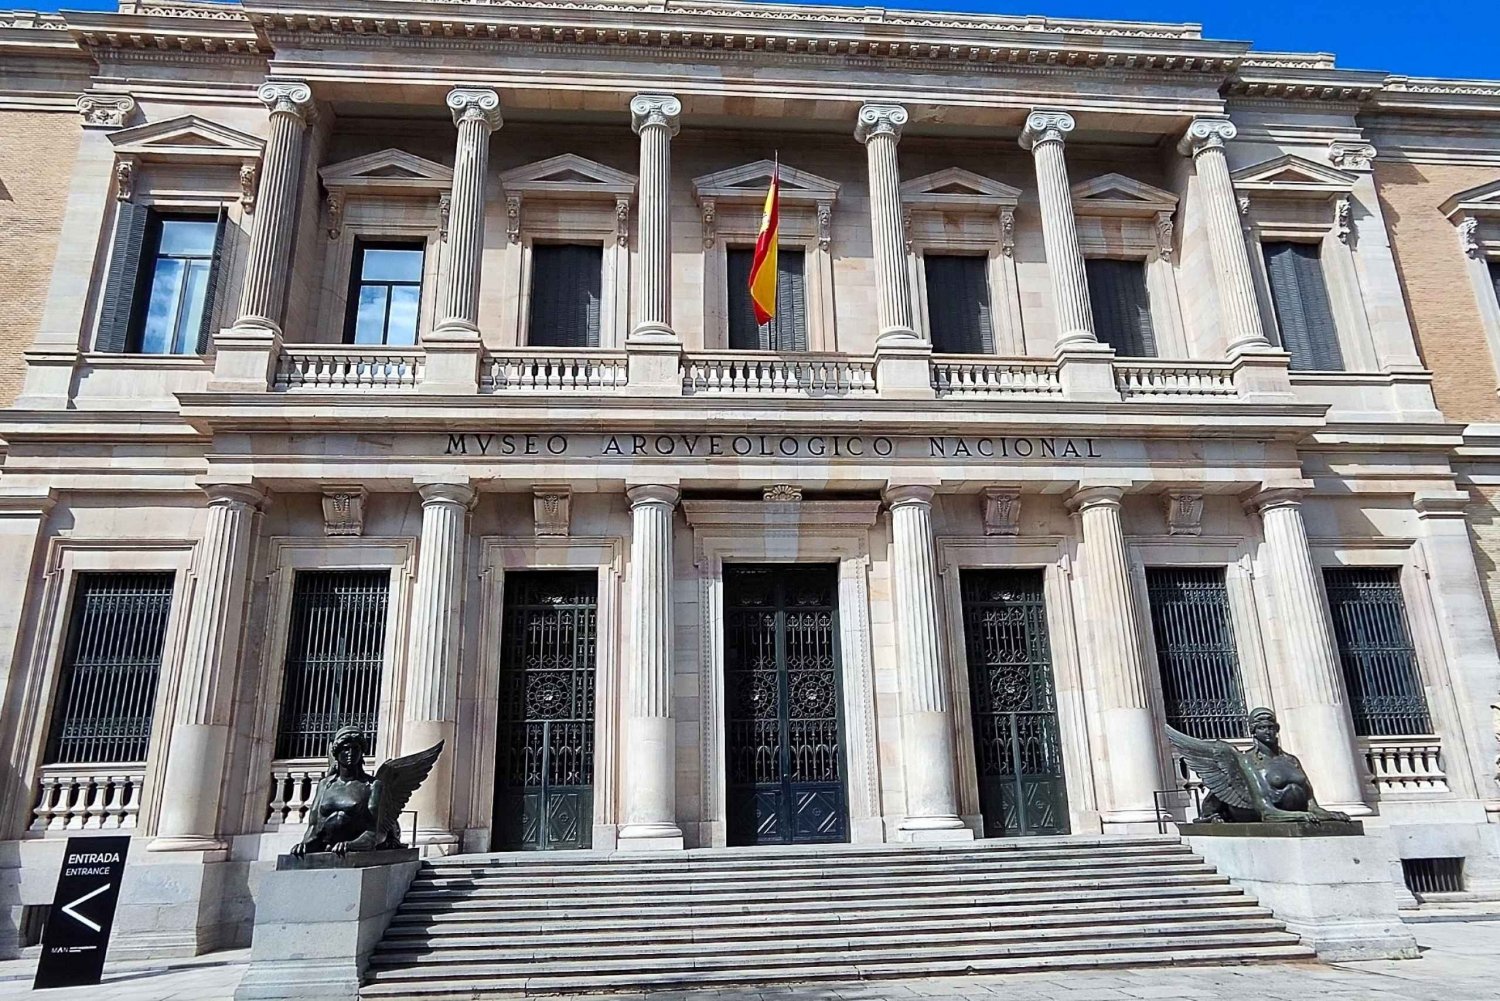 Visit the National Archaeological Museum in Madrid